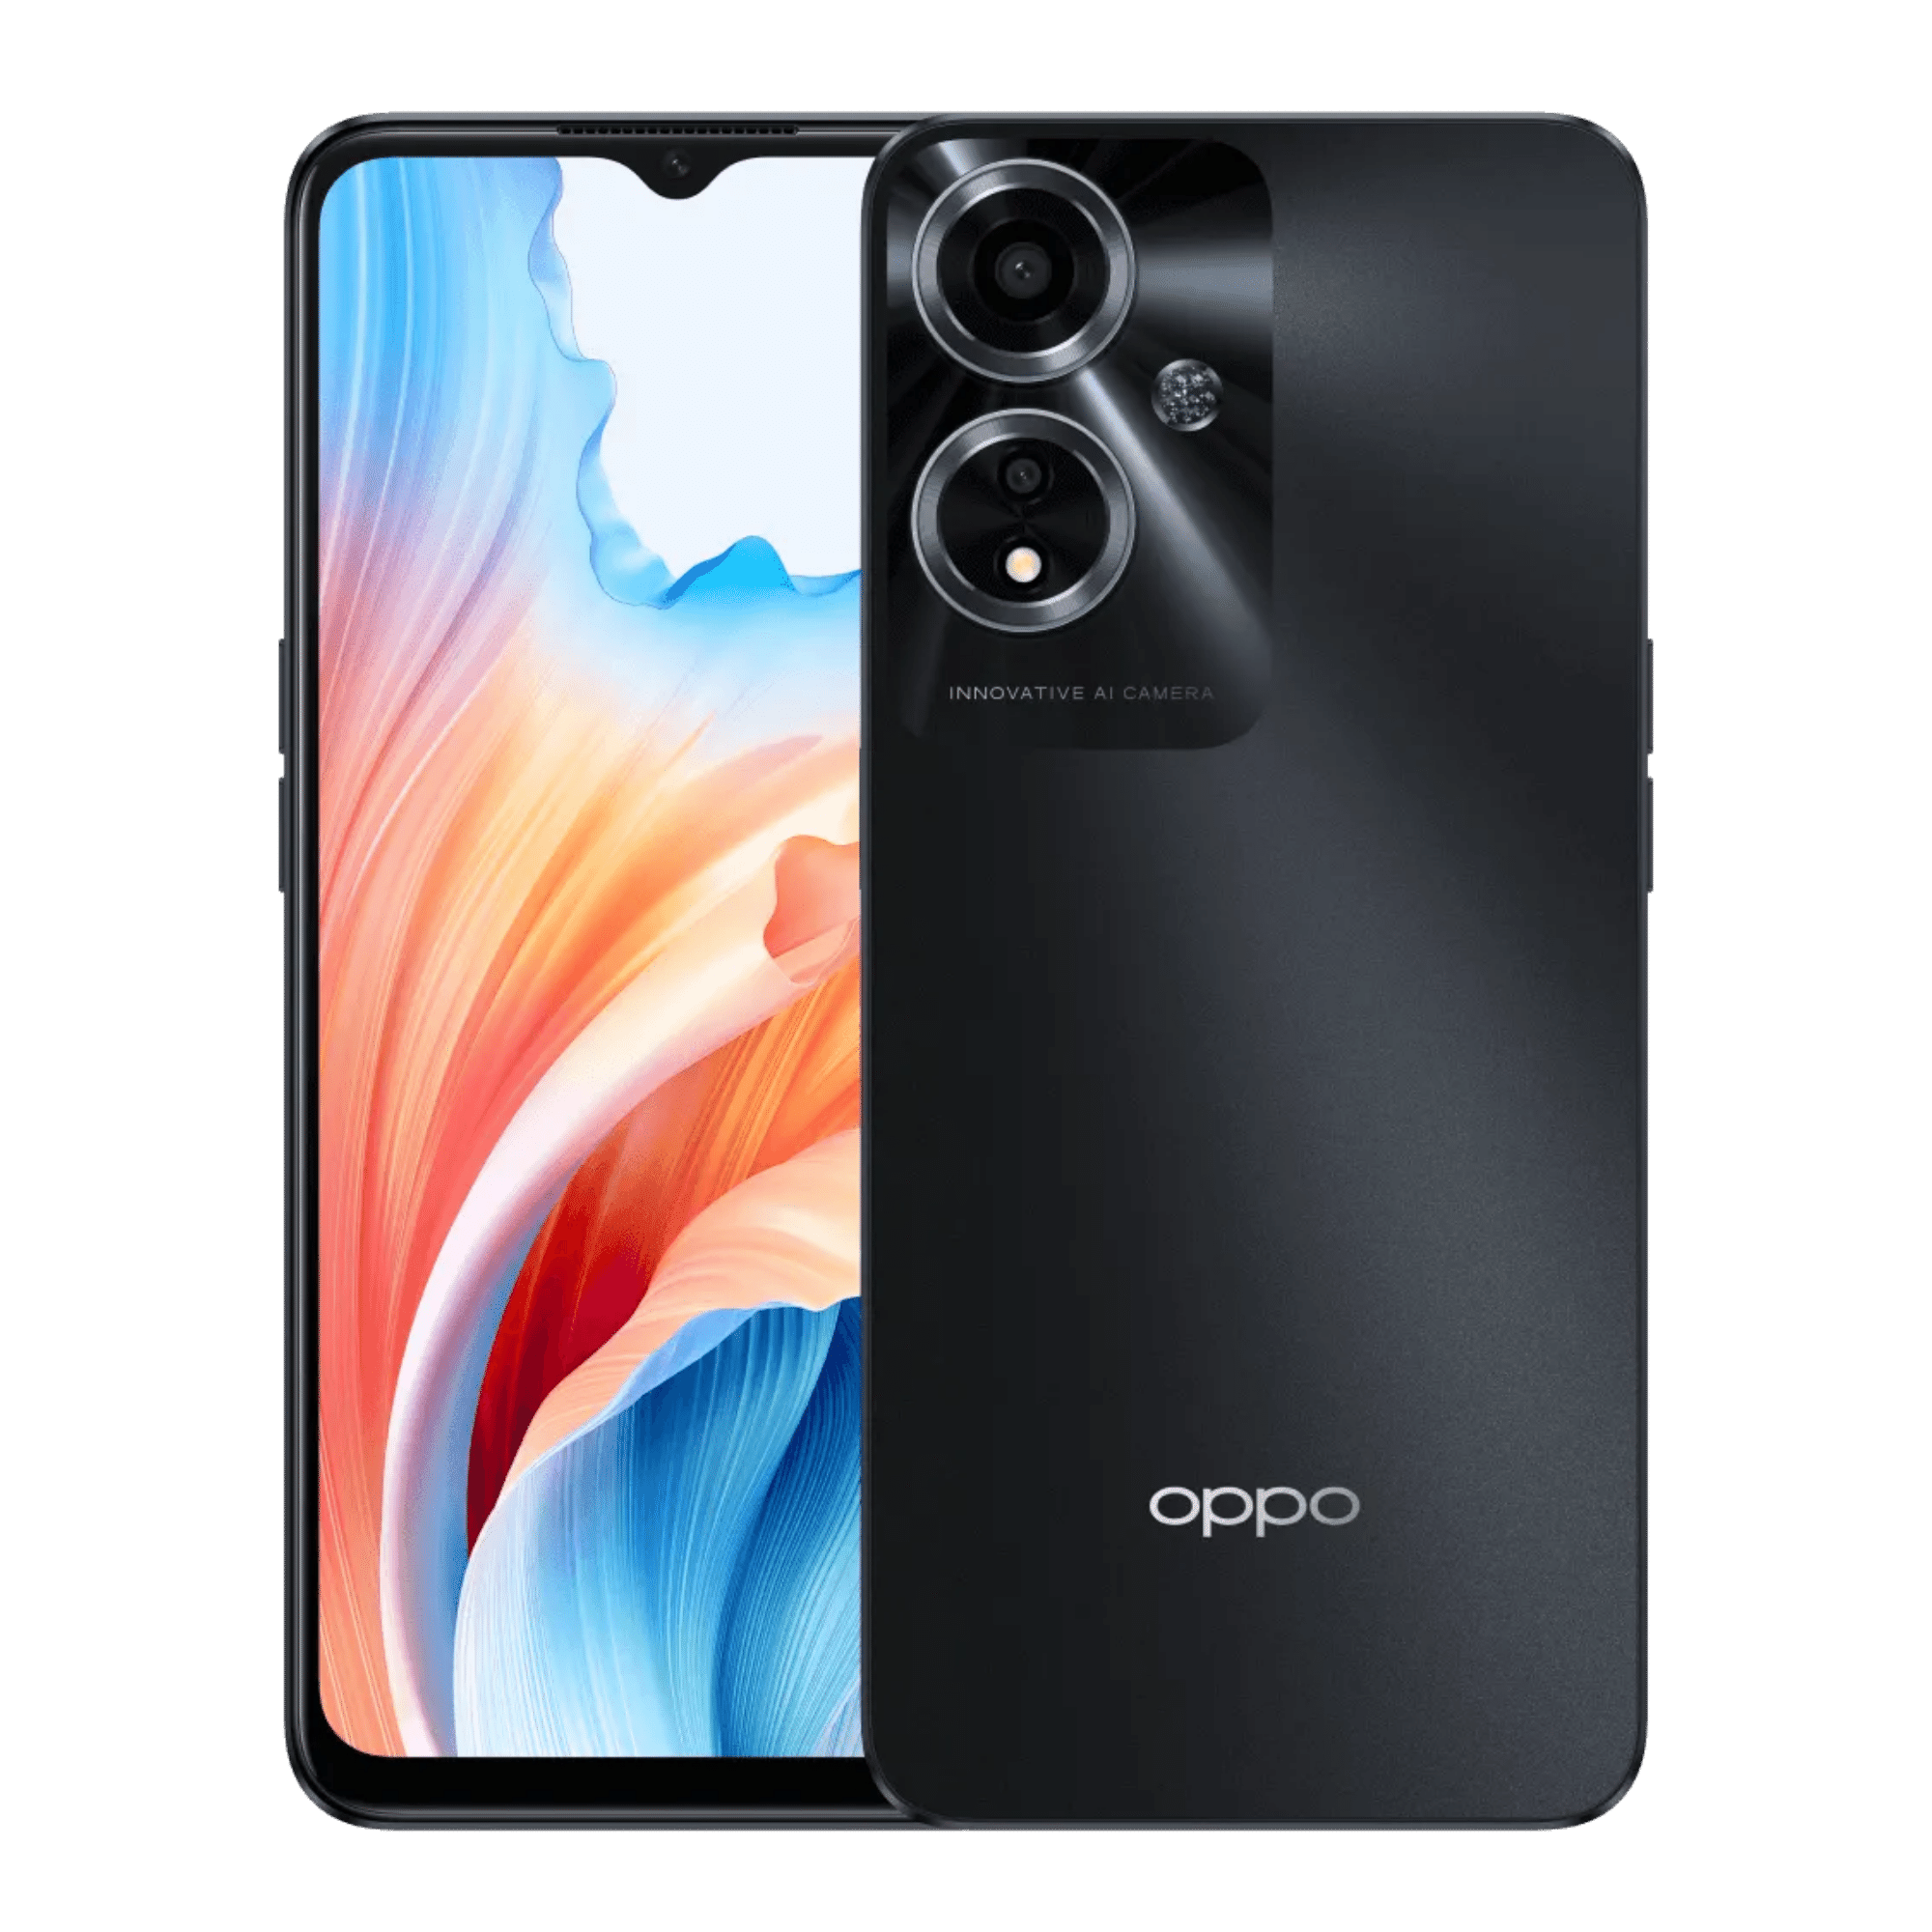 Glowin Black OPPO A78 5G at Rs 18489 in Mangalore